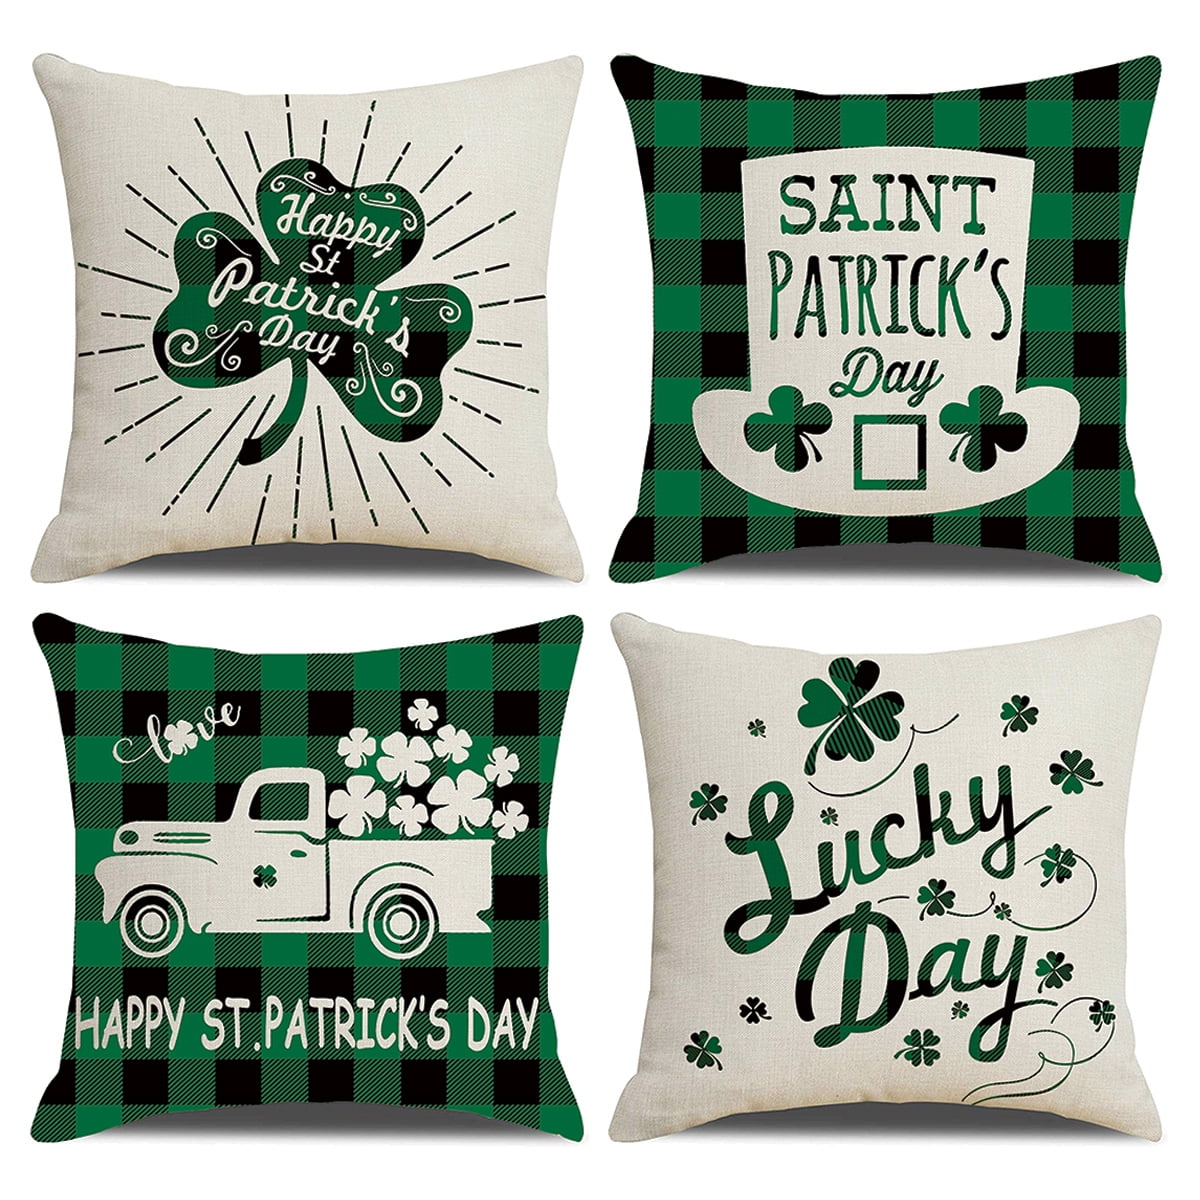 Green Shamrock Cotton Pillow Cover/16" x 16" or 18"x18" St Patricks Day 